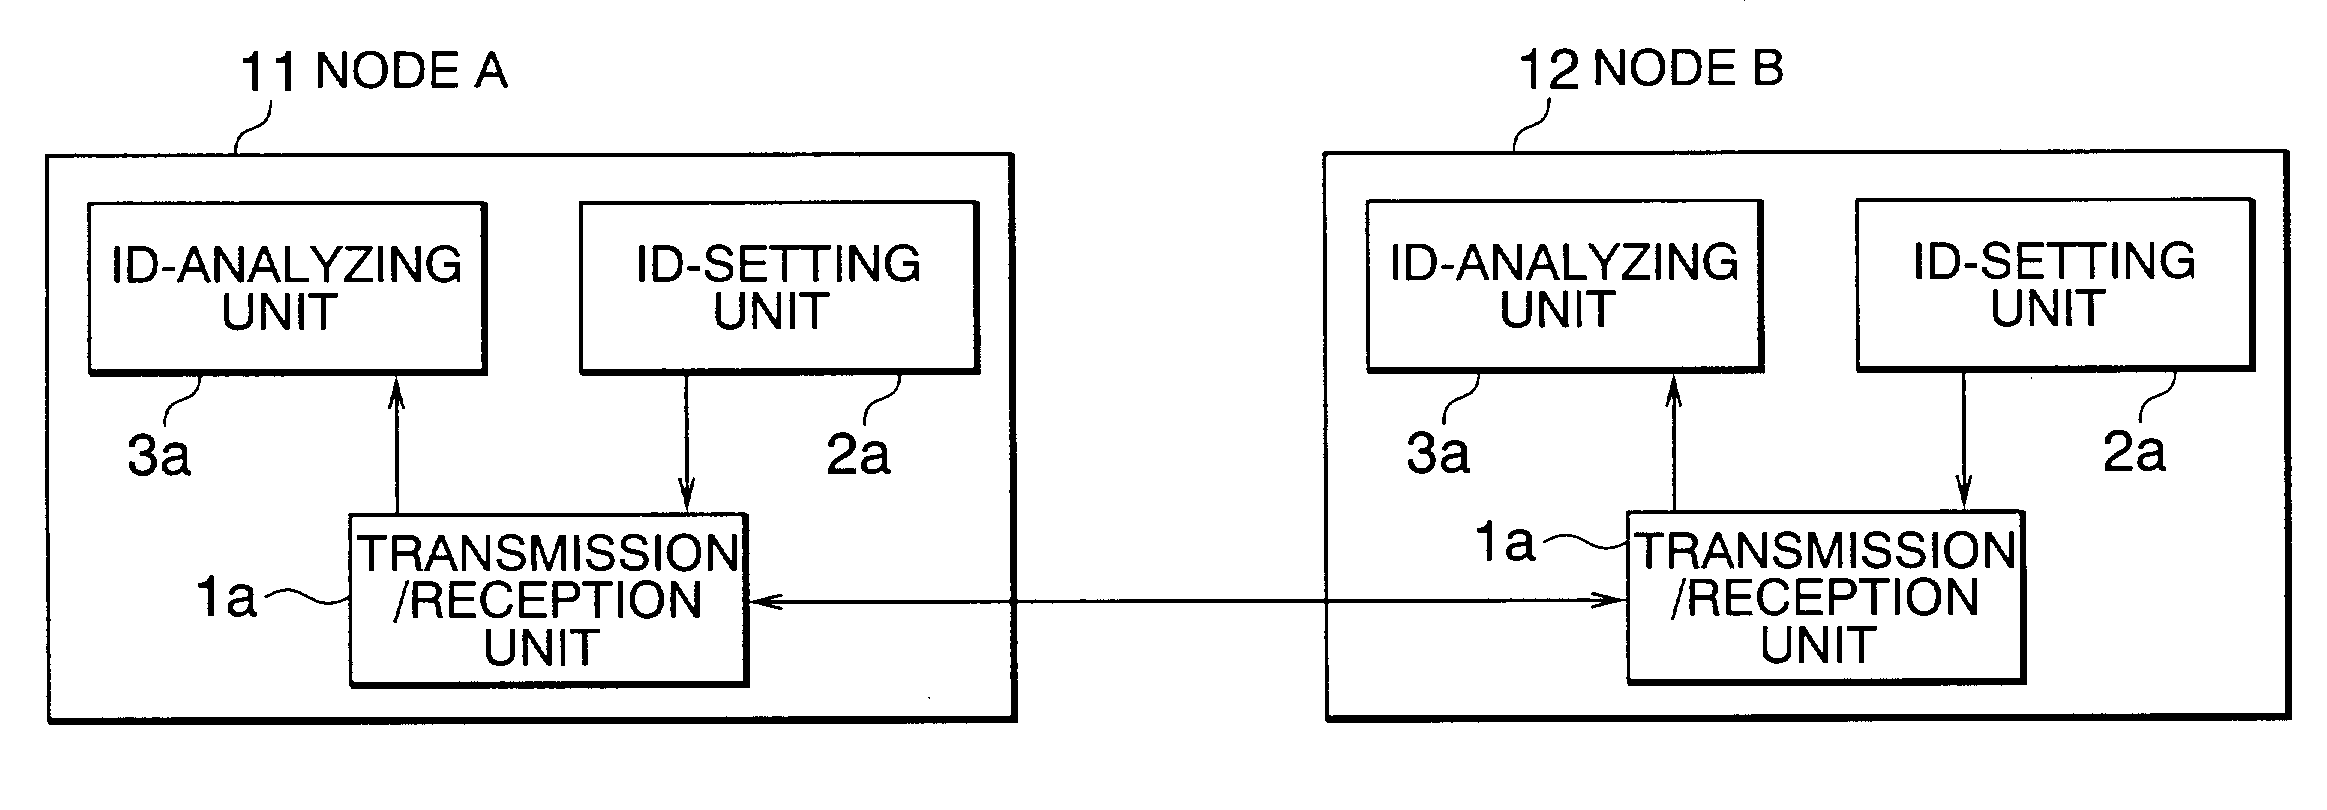 Controller area network (CAN) communication device